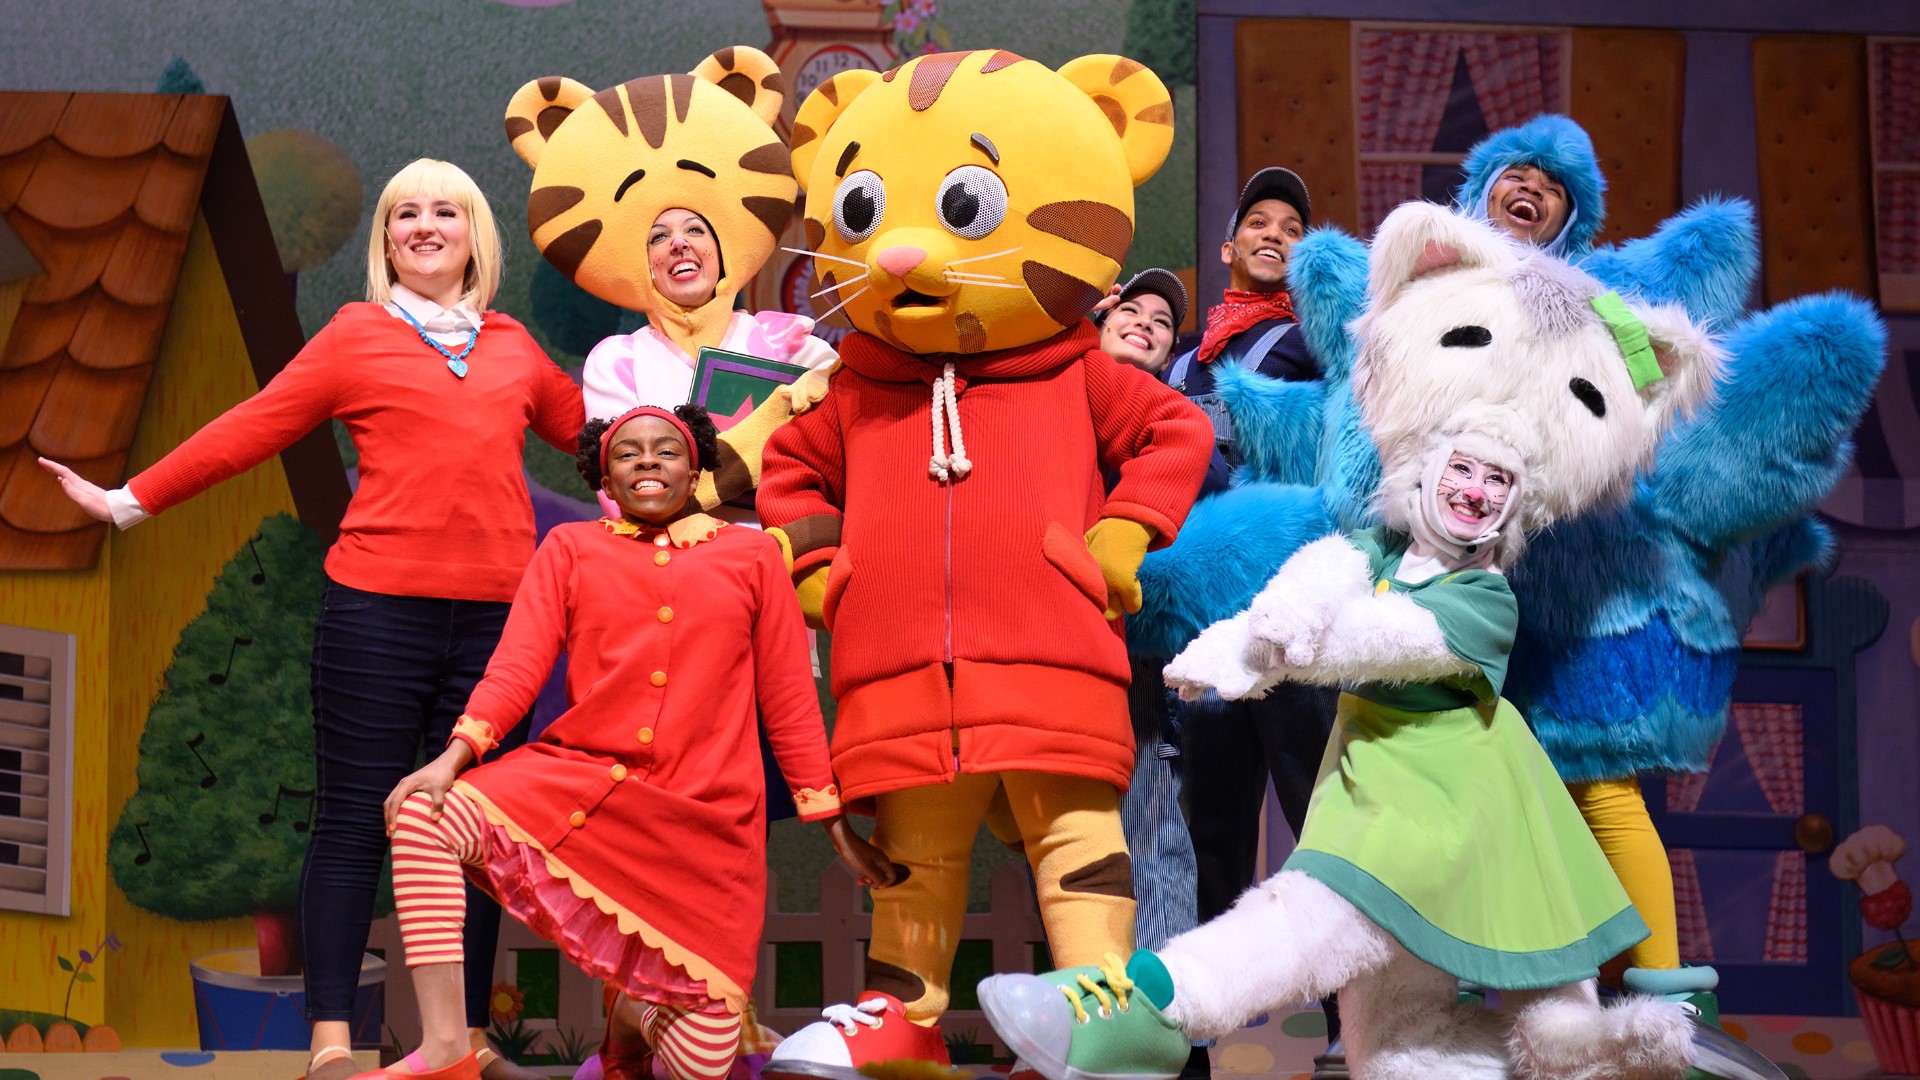 “Daniel Tiger’s Neighborhood Live: Neighbor Day” is set to visit Denver’s Bellco Theatre for two shows on Saturday, March 14, 2020.